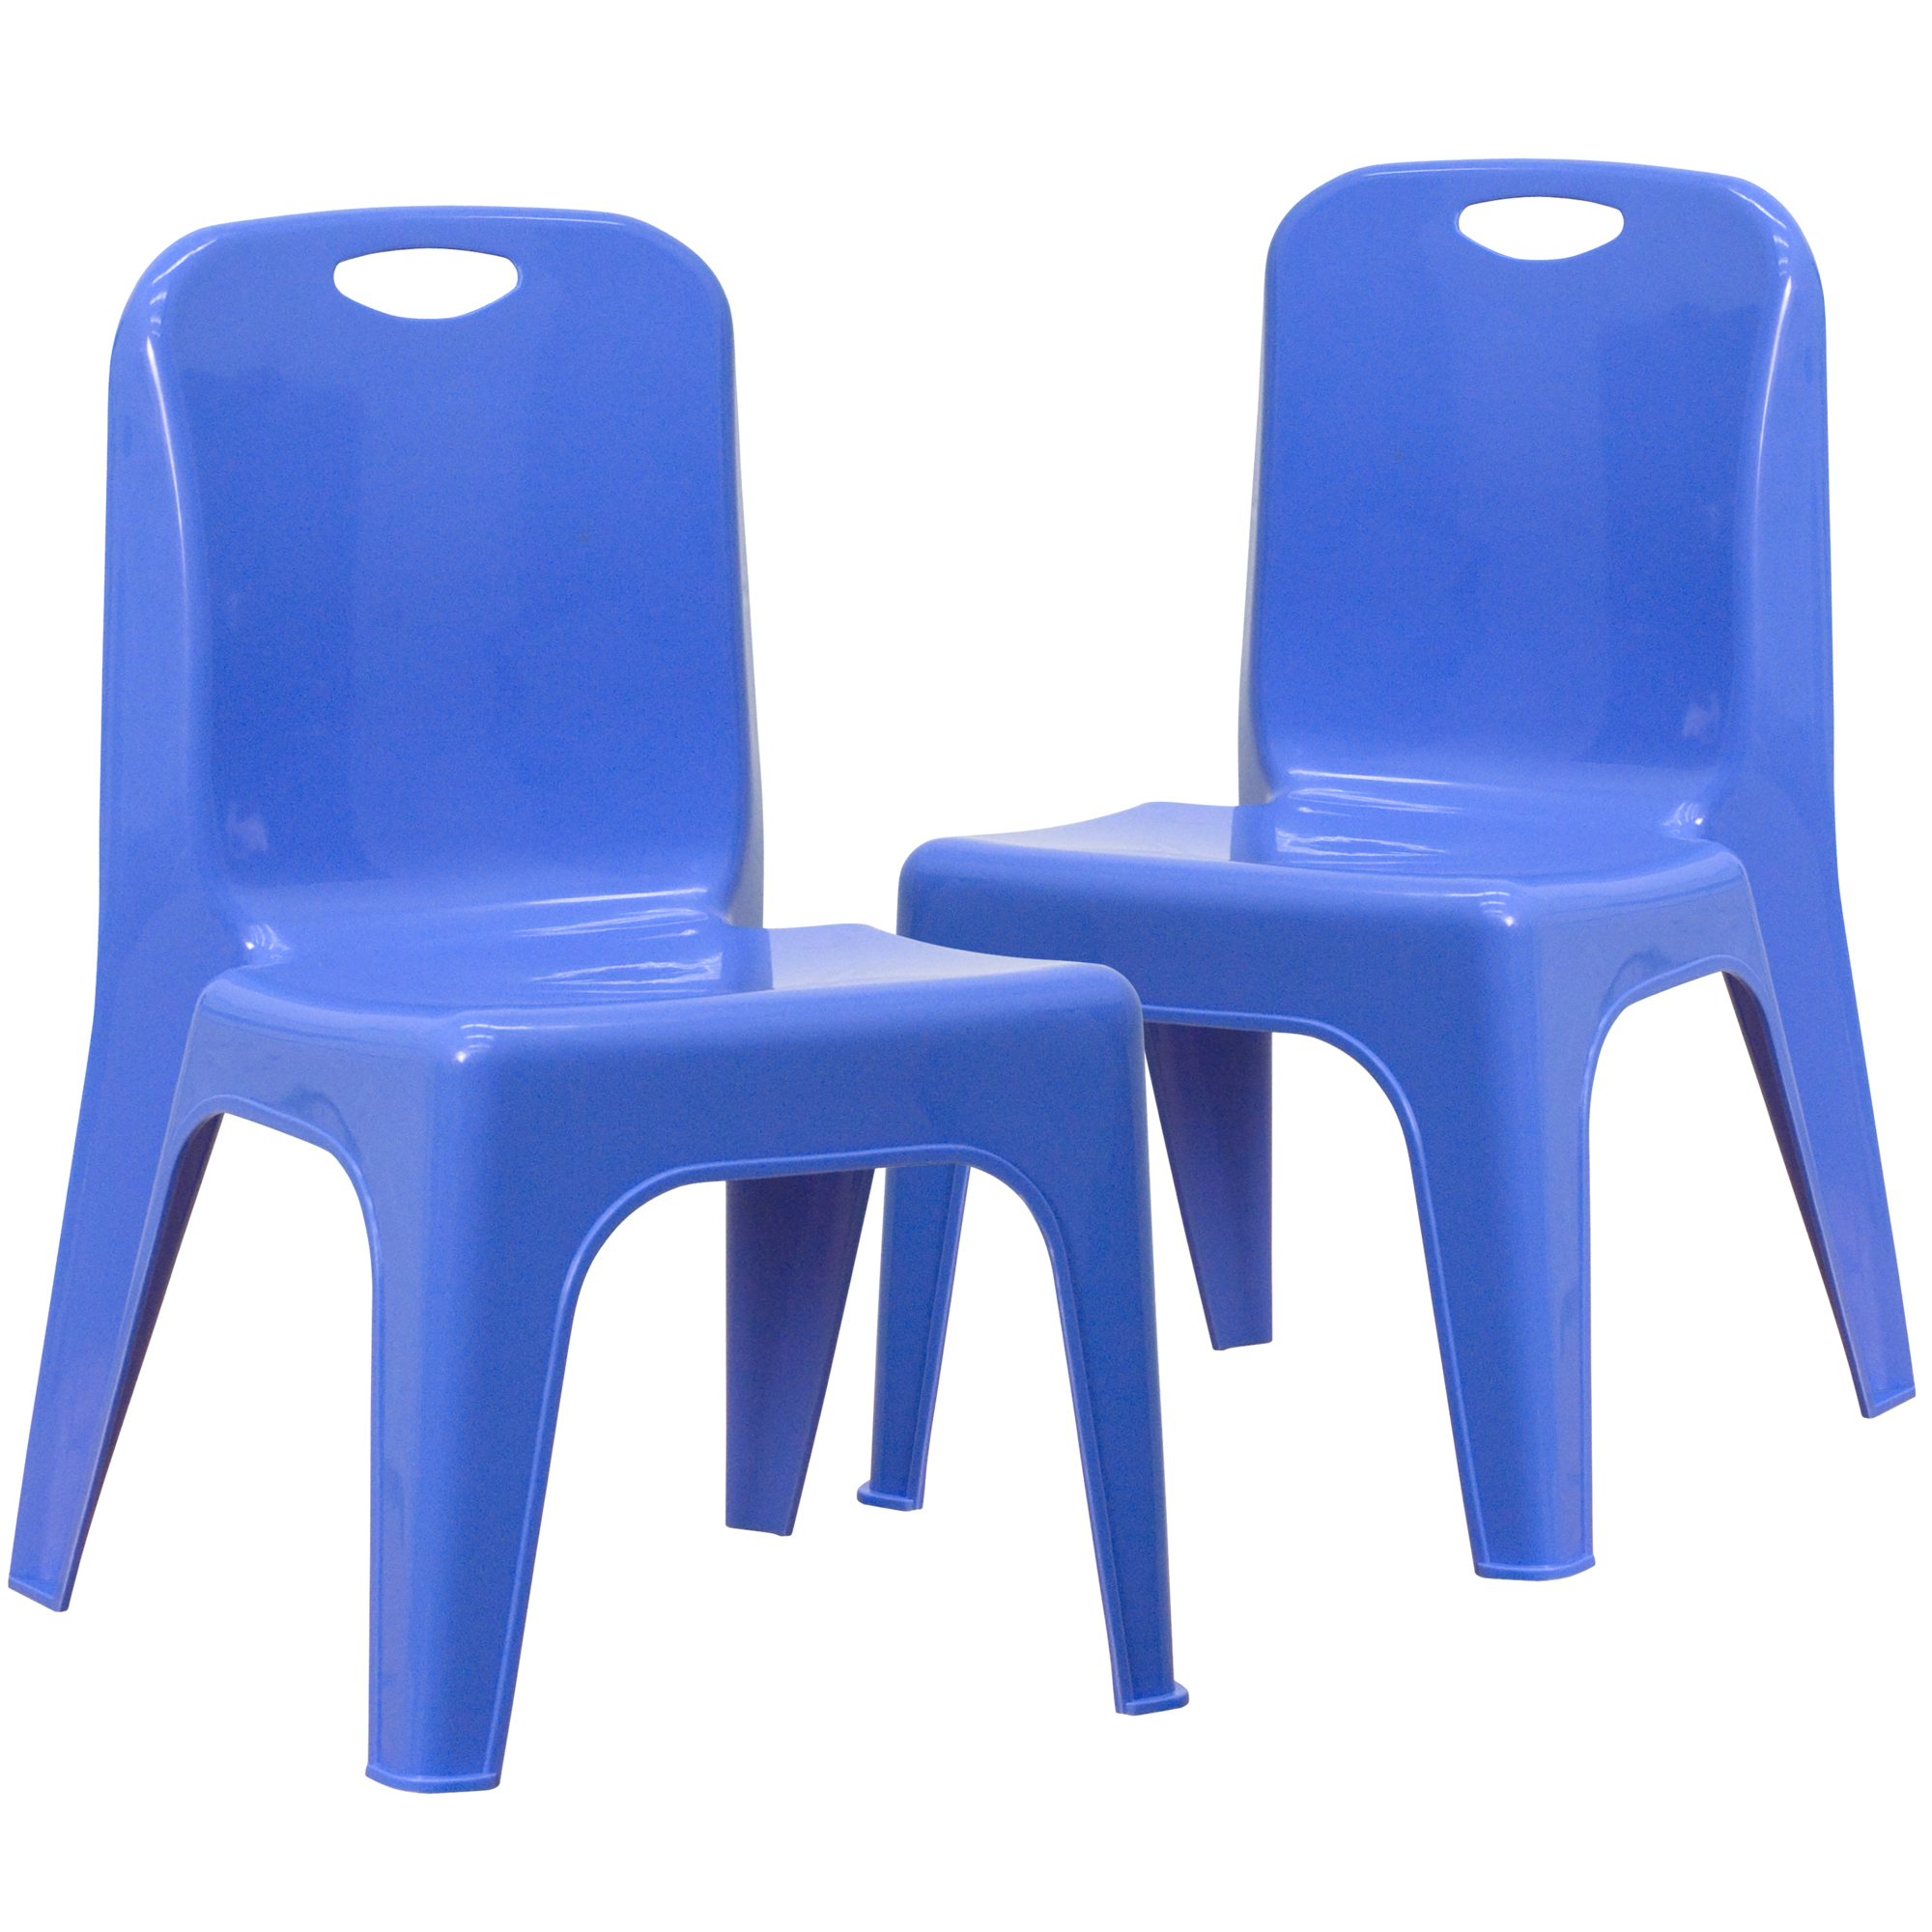 Flash Furniture, 2 Pack Blue Plastic Stack School Chair-11Inch H Seat, Primary Color Blue, Included (qty.) 2, Model 2YUYCX011BLUE